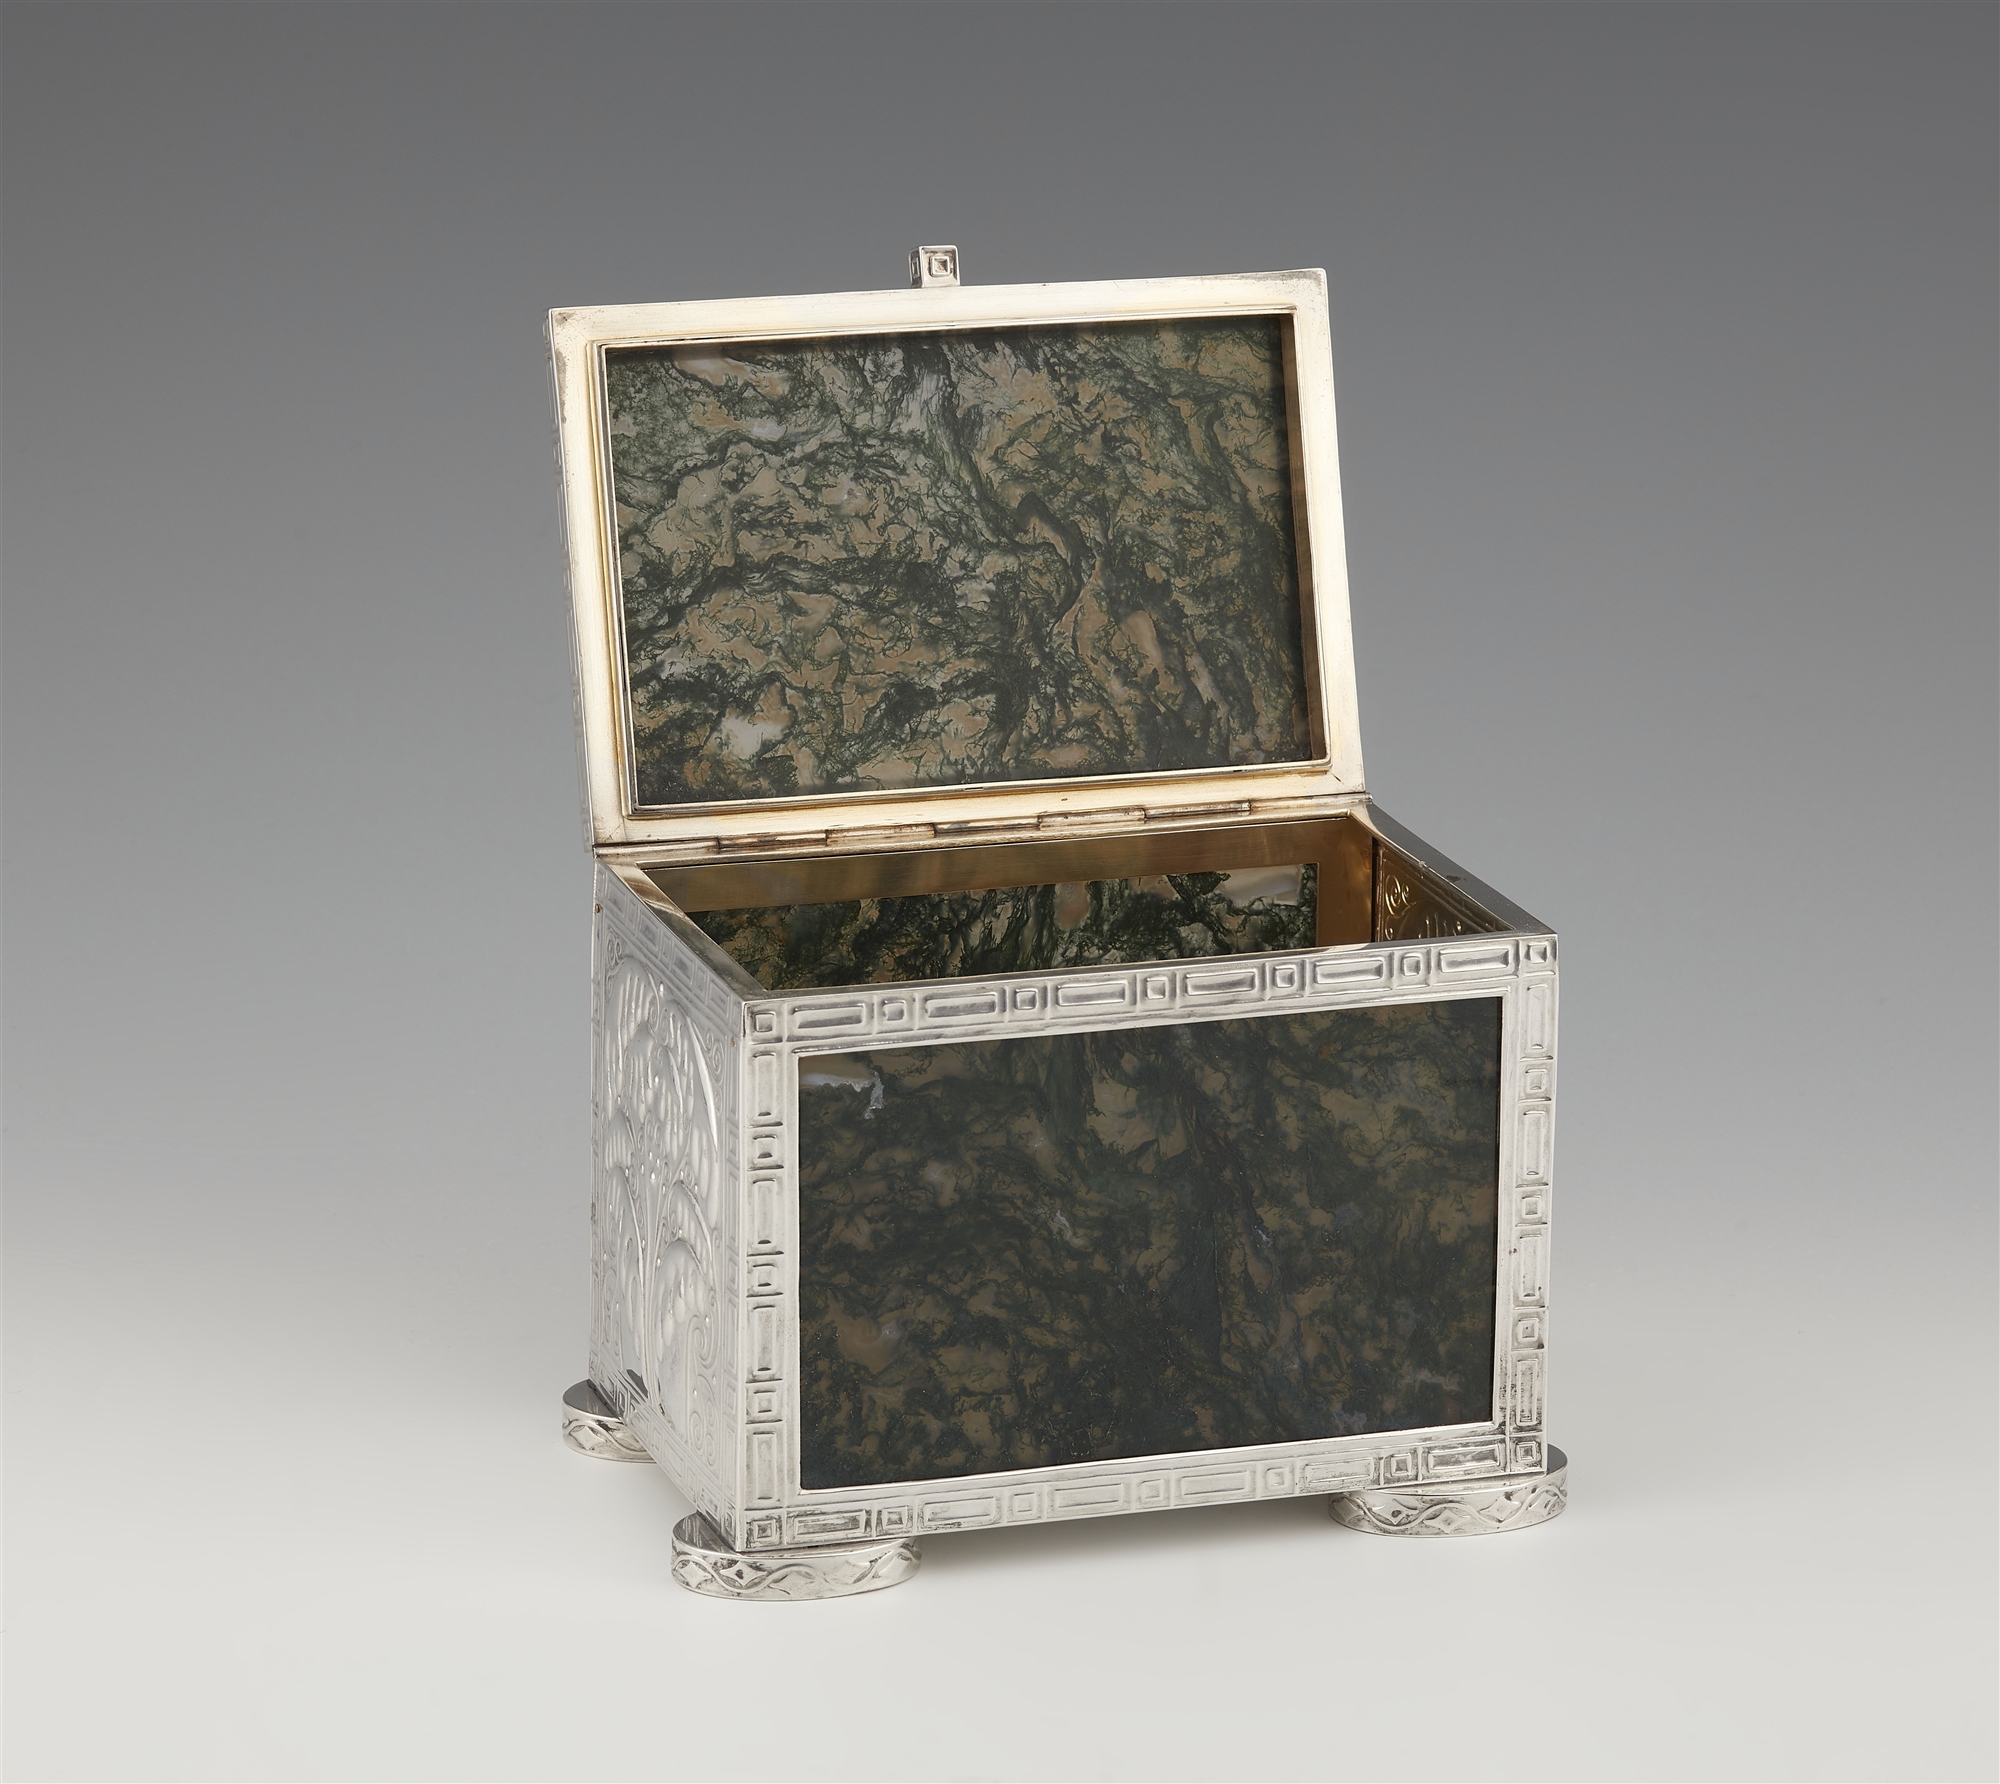 A rare silver and moss agate casket by Josef Hoffmann - Image 6 of 8